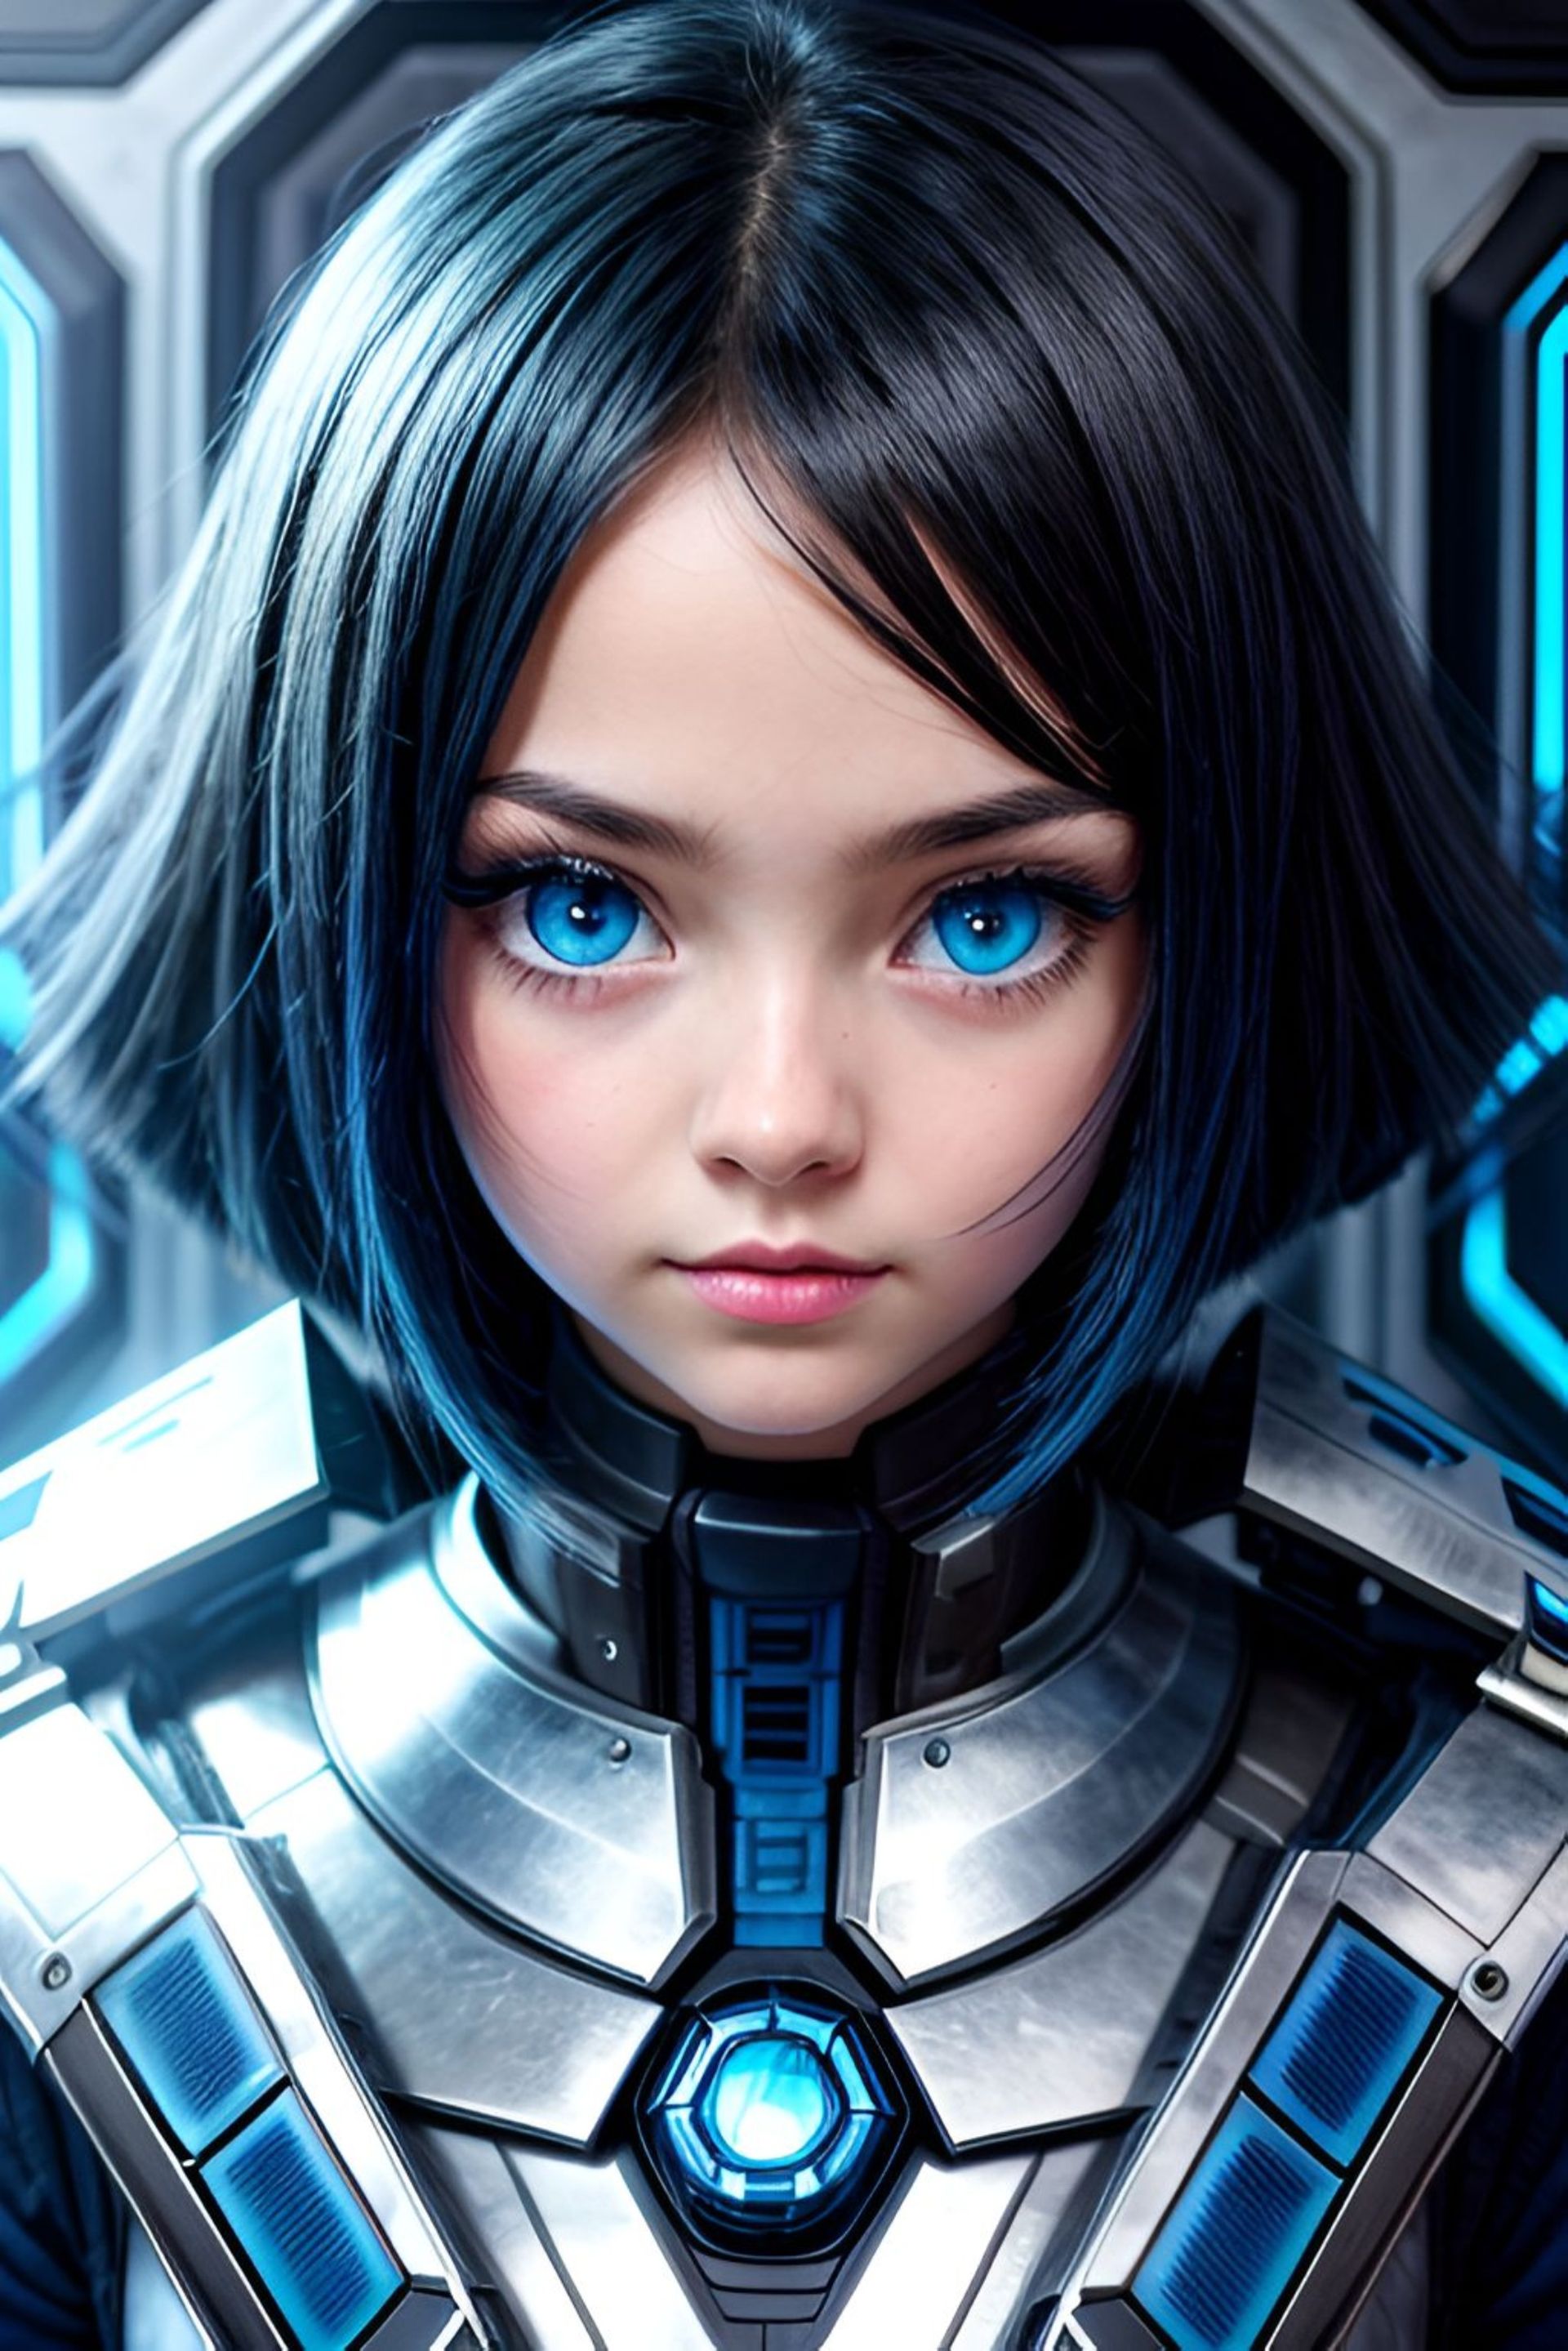 A girl, cyborg, with short hair, wearing armor.